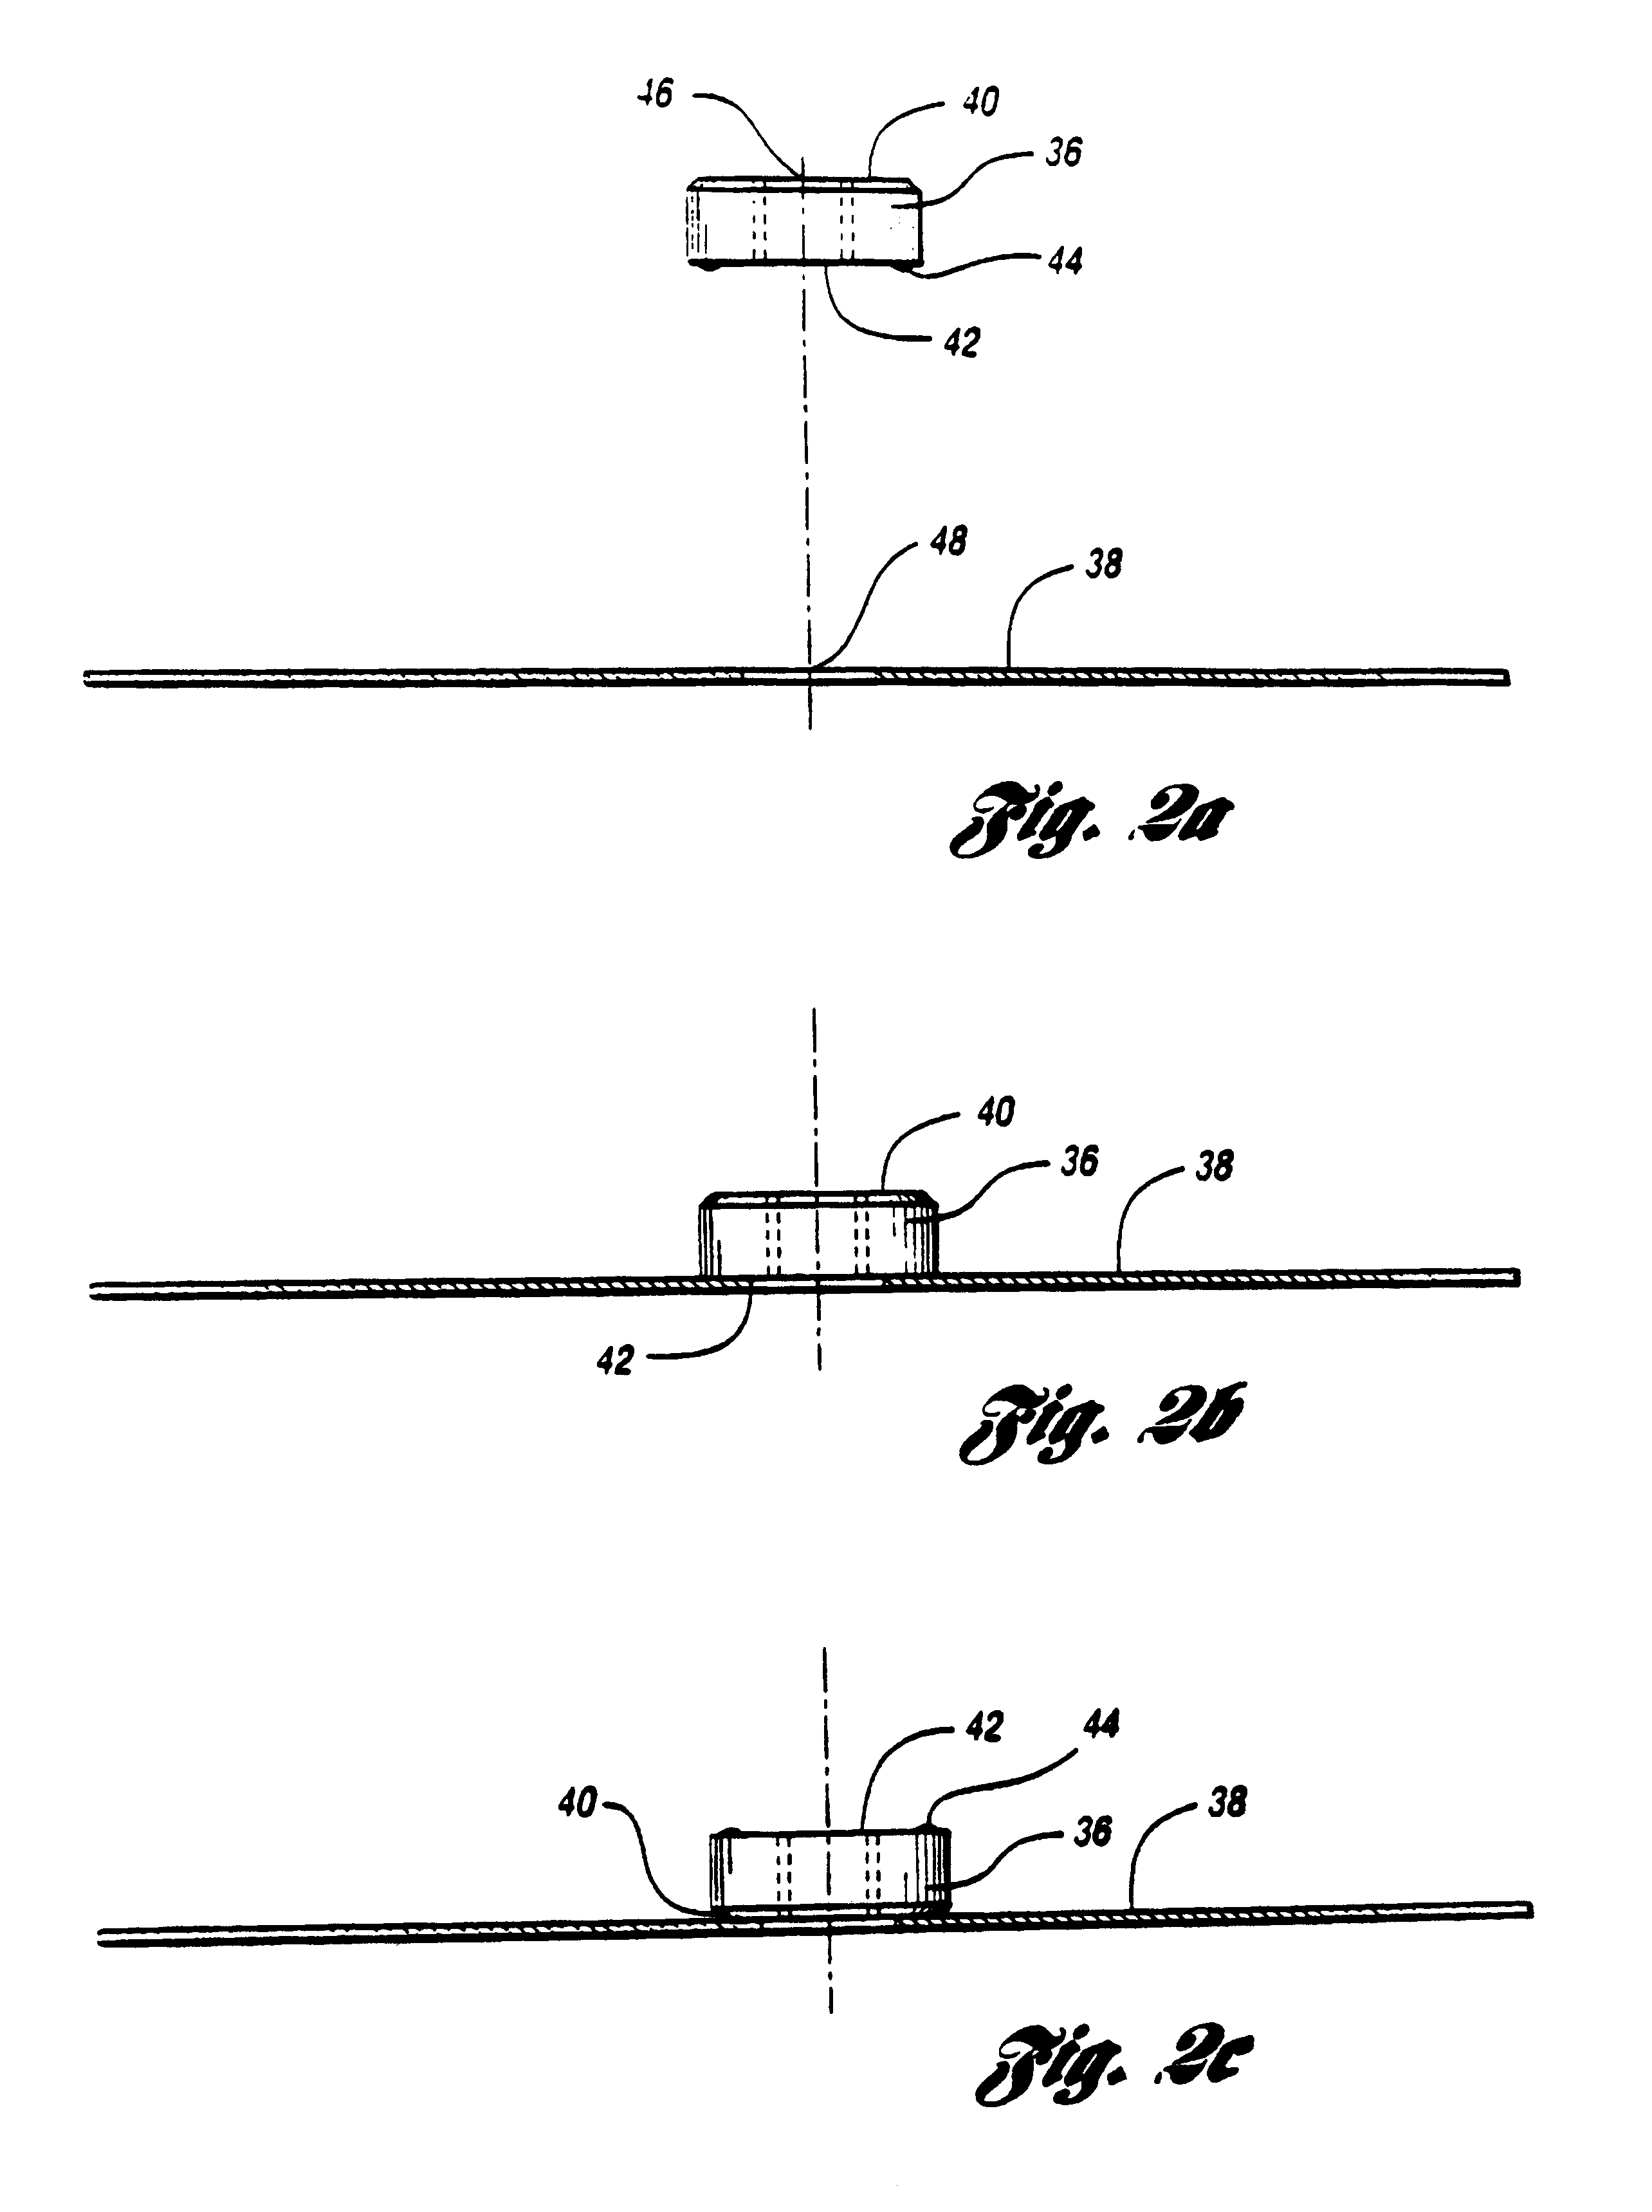 Resistance projection welding system and method for welding a fastener element to a workpiece